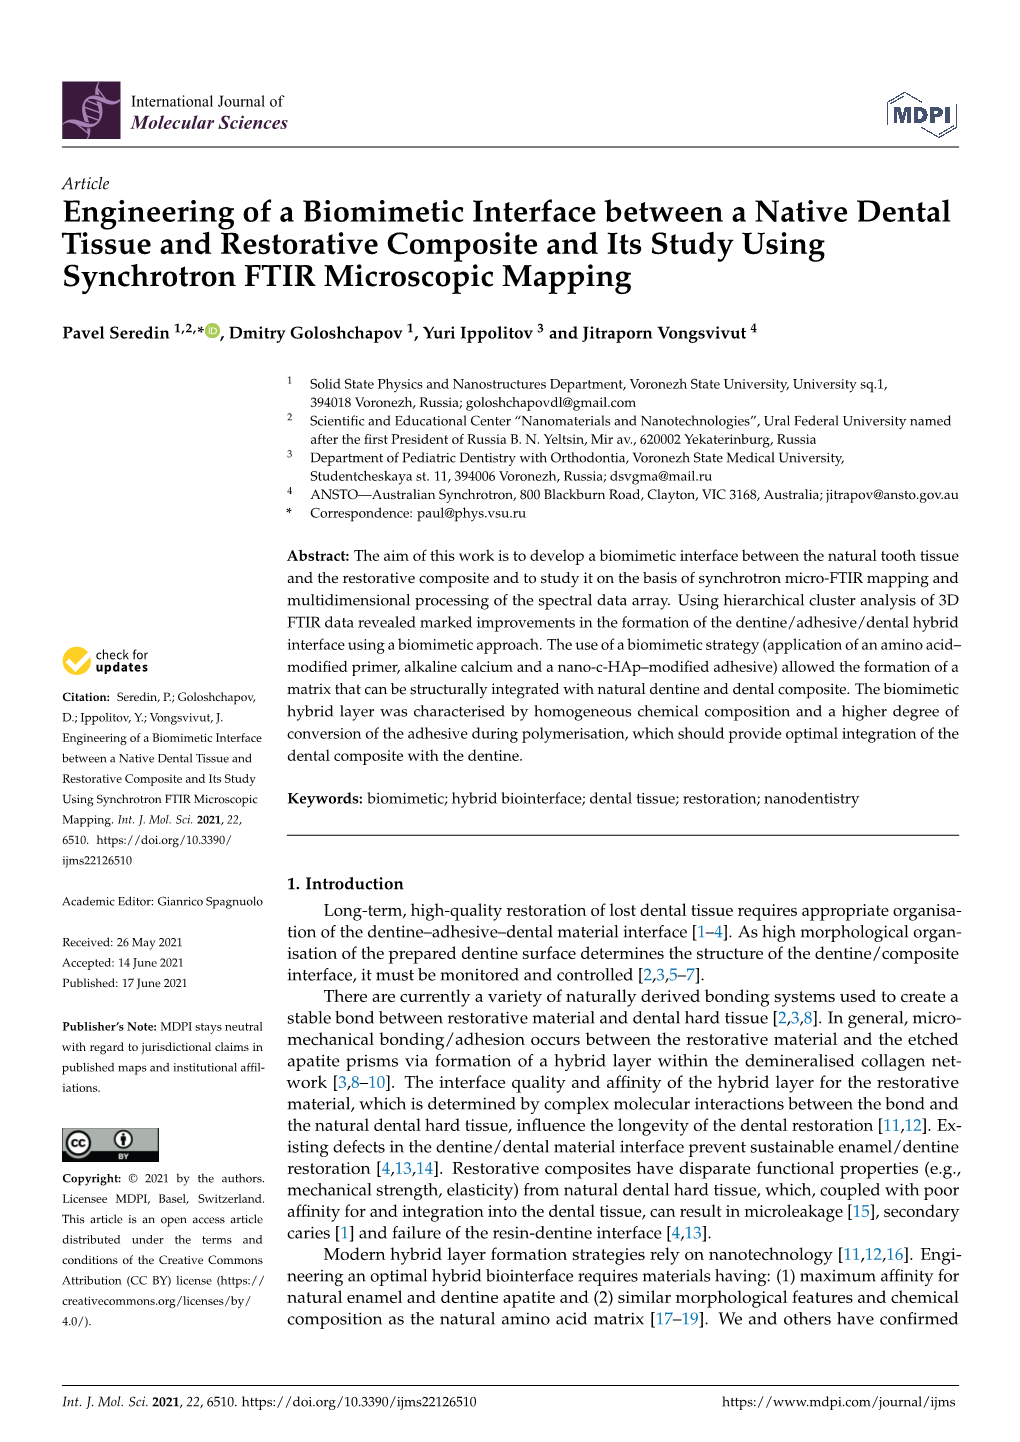 Engineering of a Biomimetic Interface Between a Native Dental Tissue and Restorative Composite and Its Study Using Synchrotron FTIR Microscopic Mapping